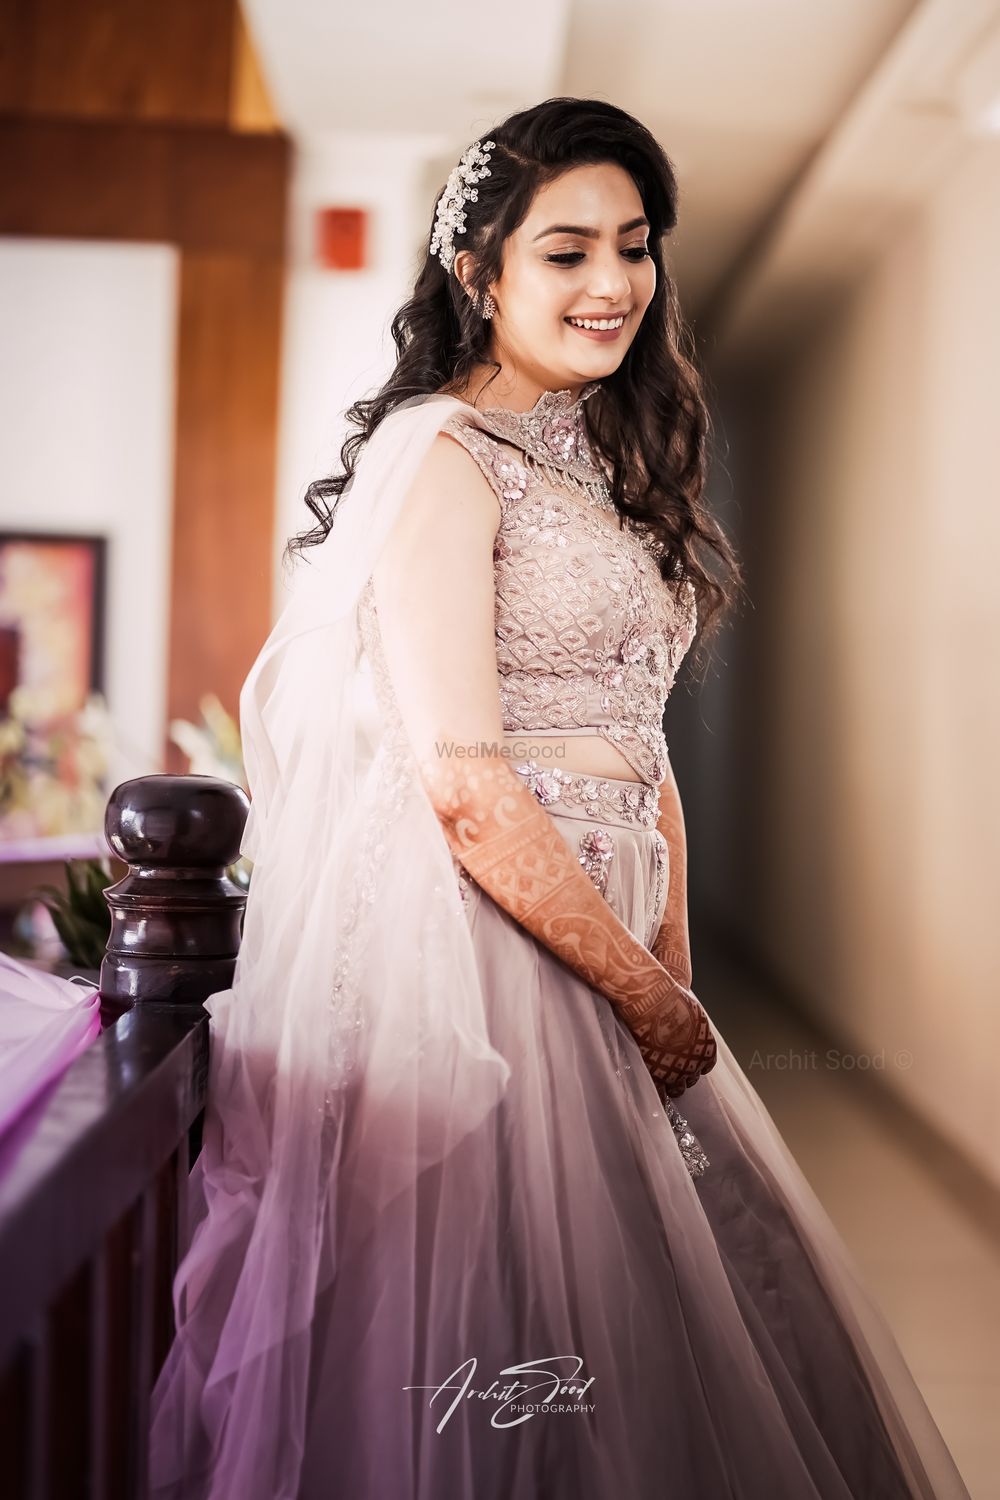 Photo From destination wedding - By Archit Sood Photography